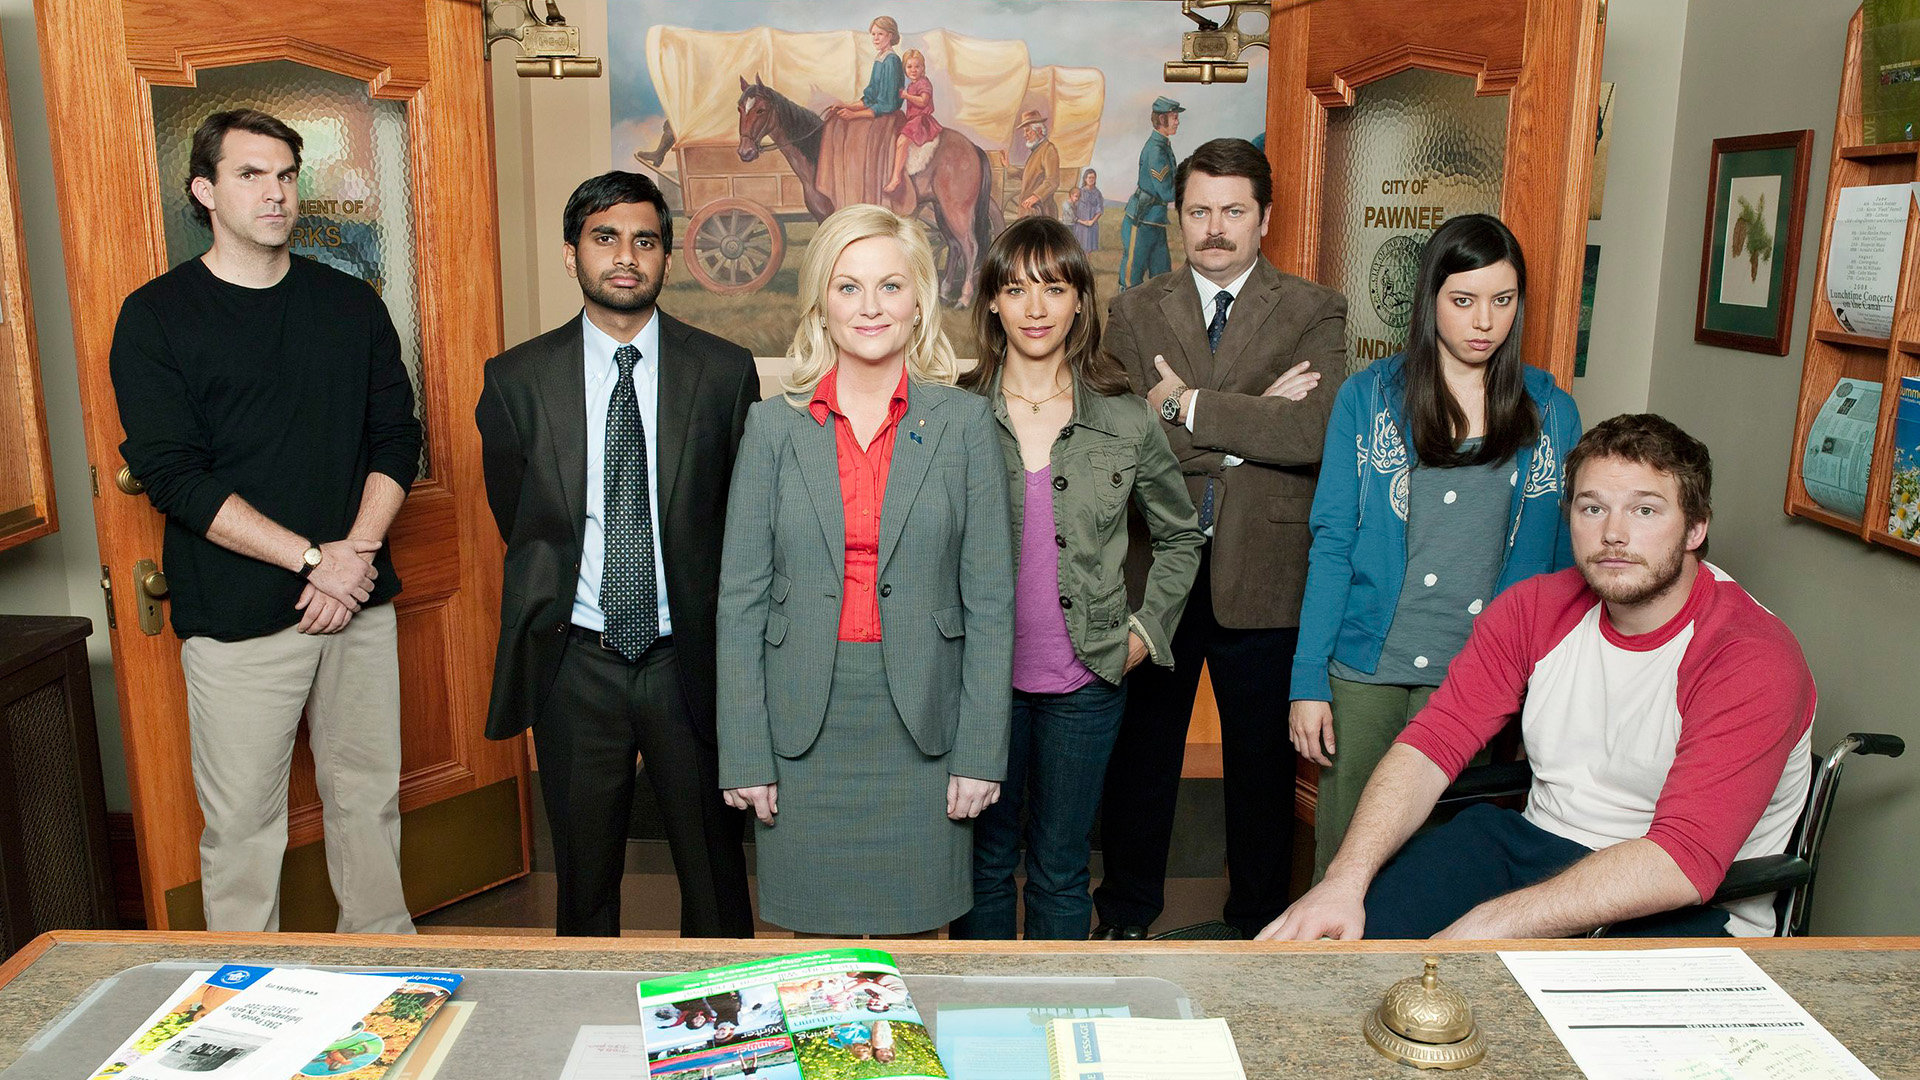 Best Parks And Recreation Wallpaper Id - Parks And Rec Season 1 Cast - HD Wallpaper 